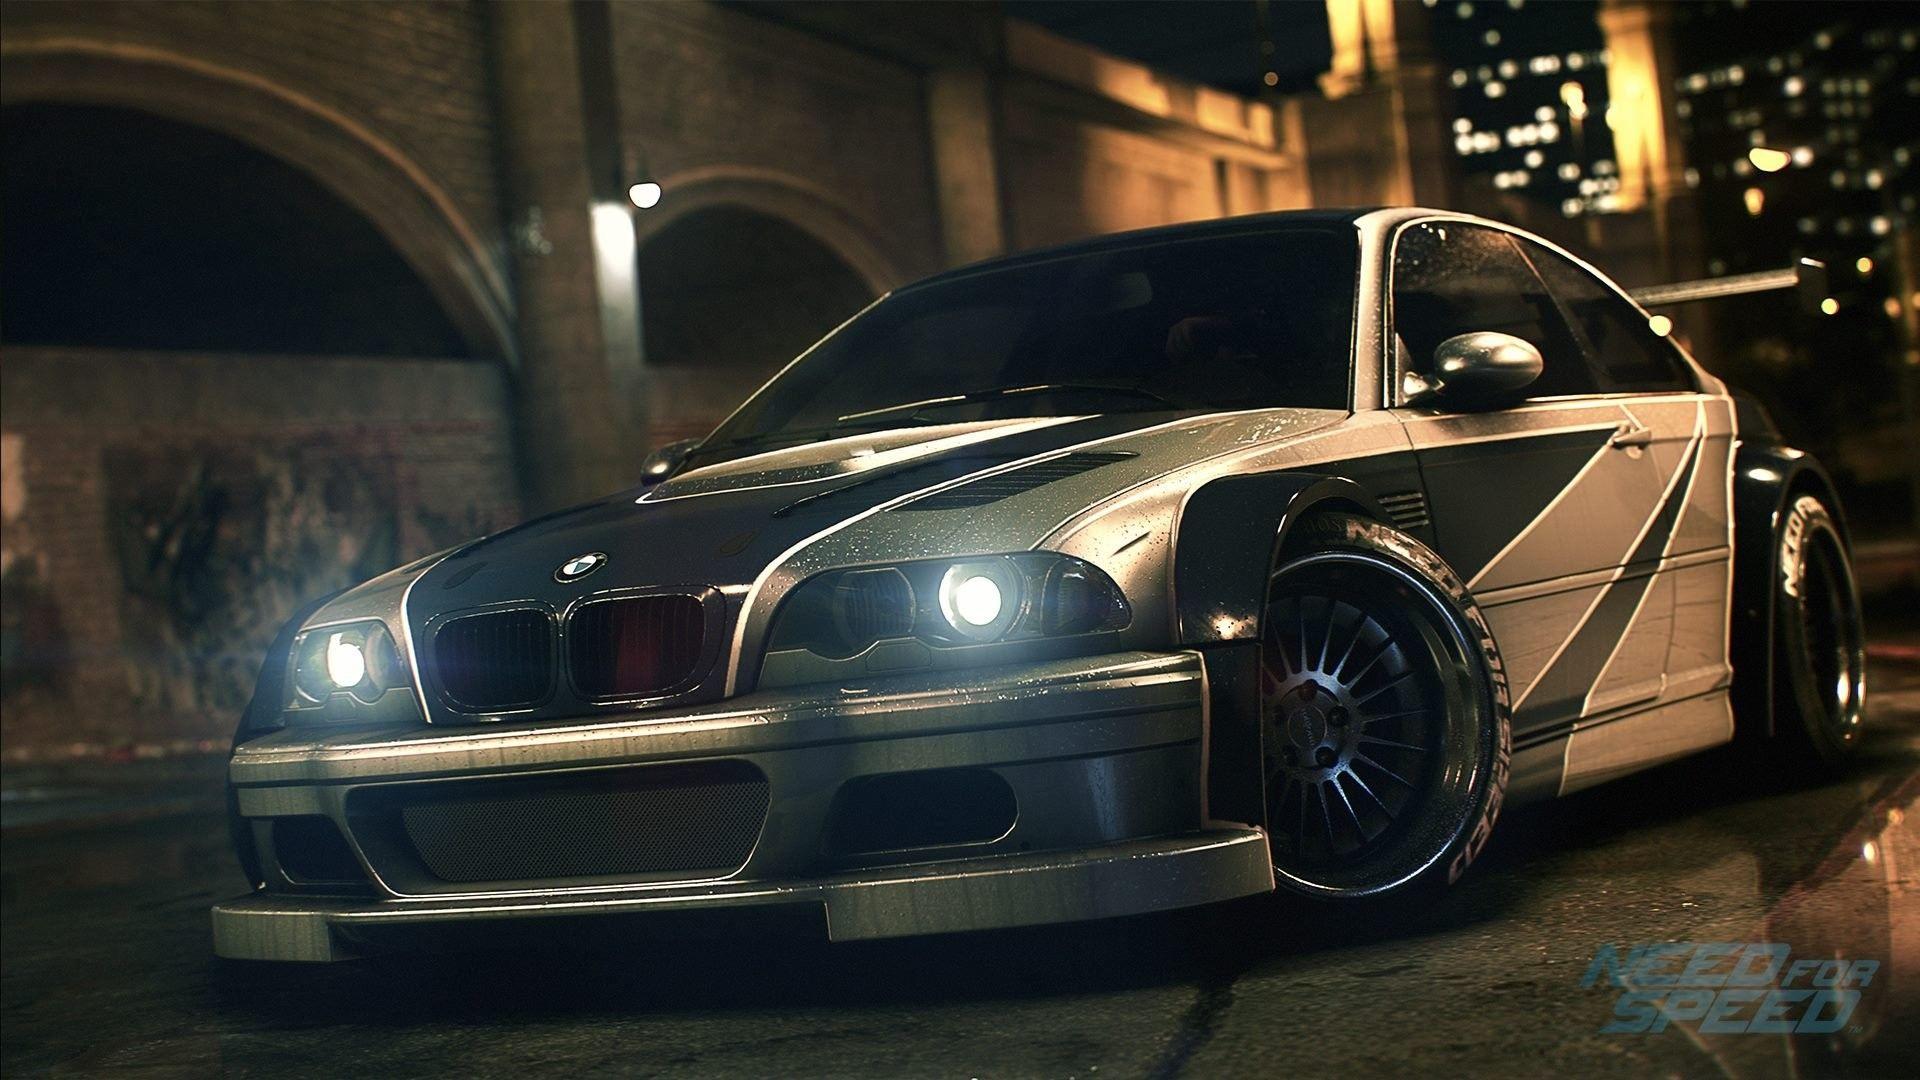 Nfs Most Wanted Wallpaper background picture